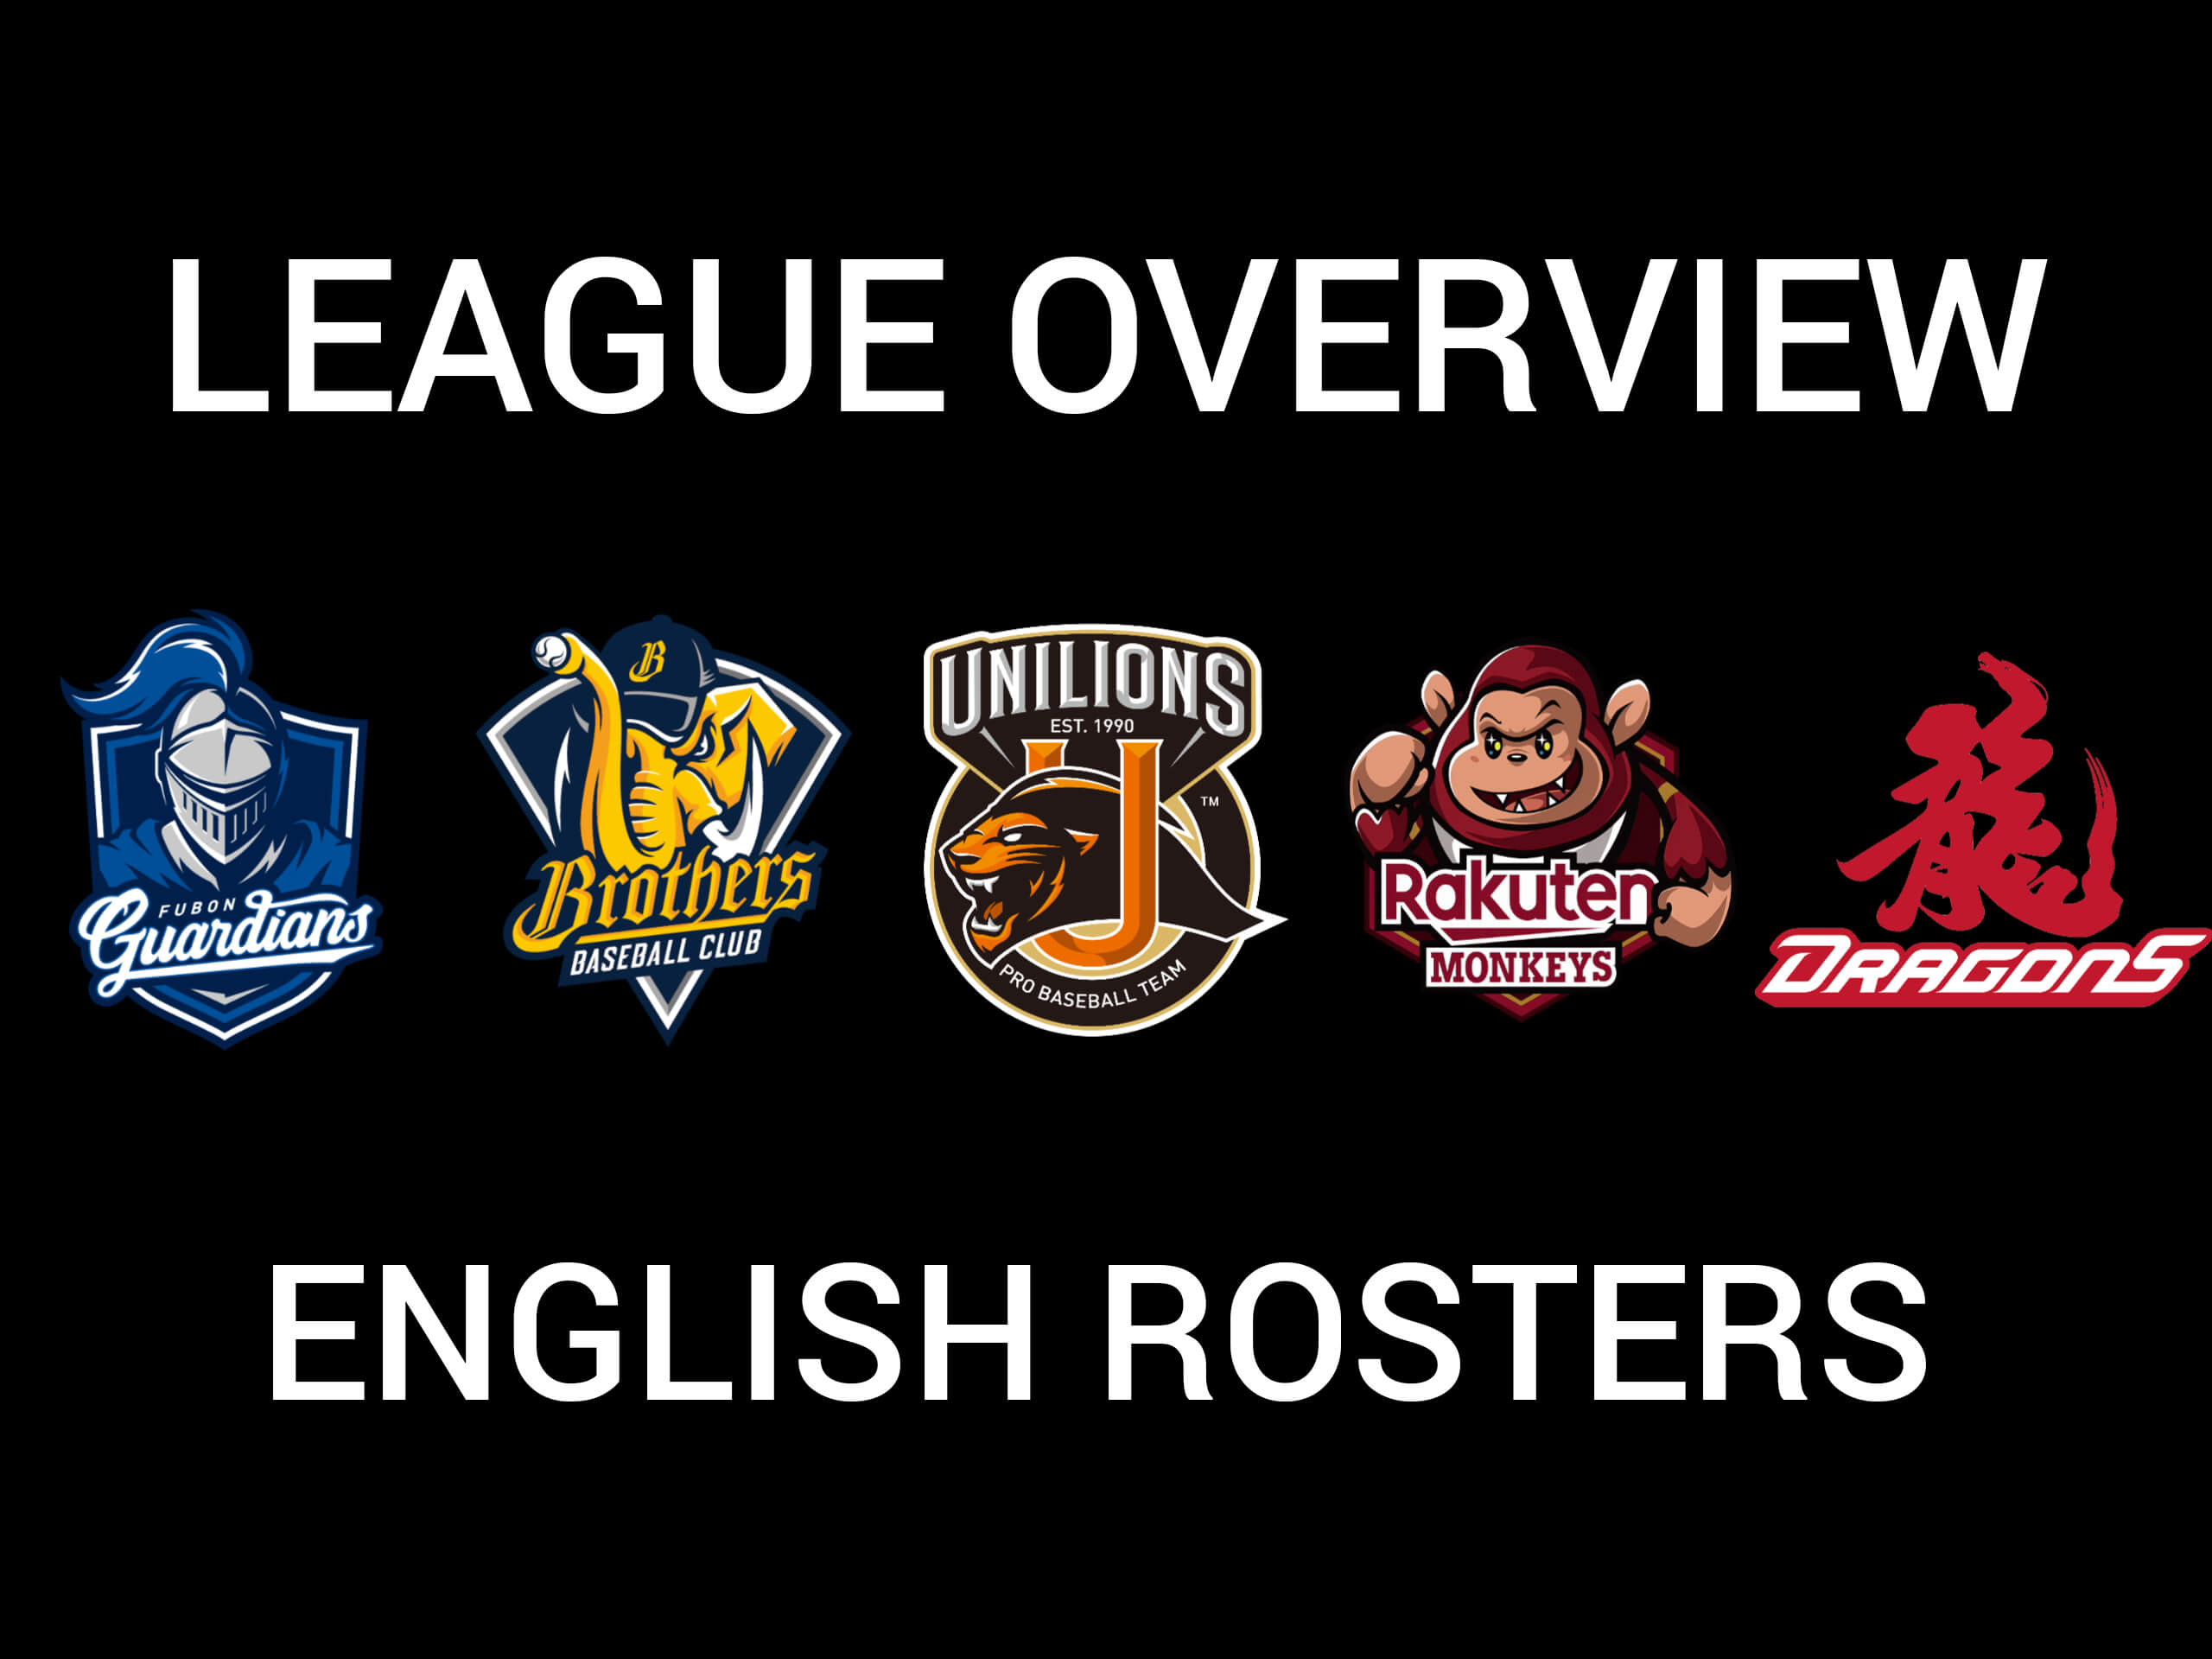 English Rosters and League Overview